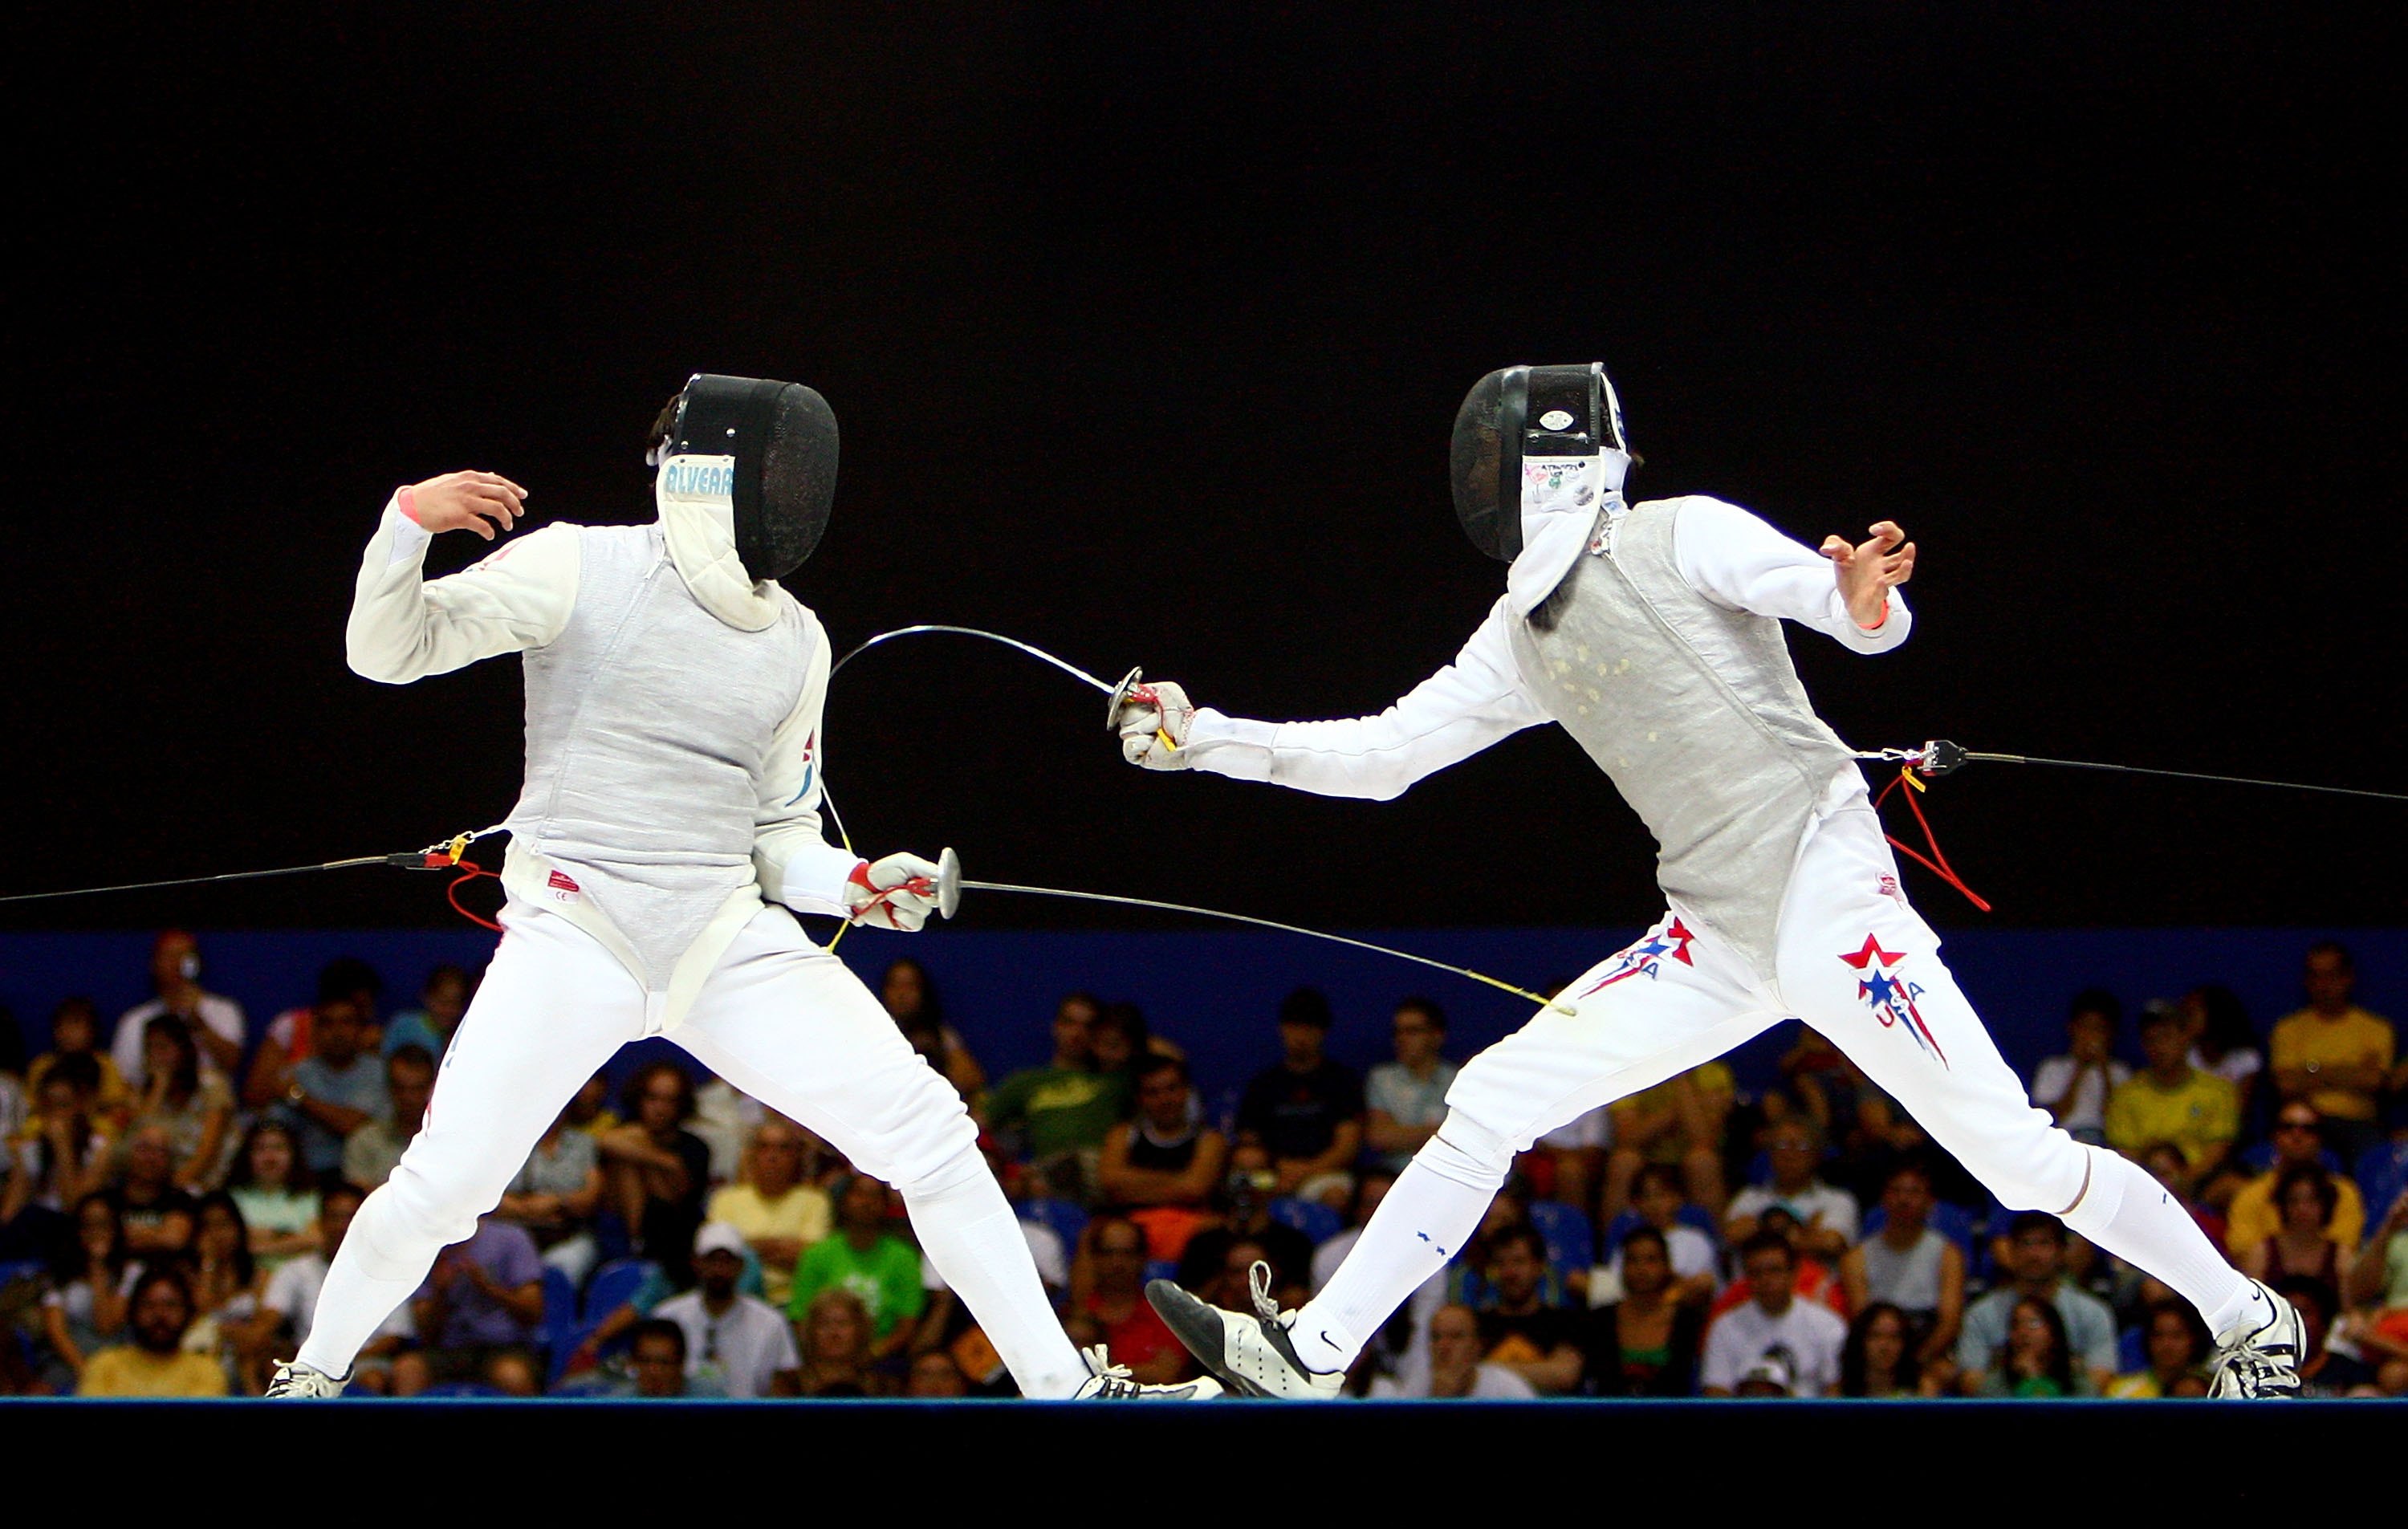 Andras Horanyi of the United States of America (R) and Felipe Alvear of Chile compete in the Men's Individual Foil final during the XV Pan American Games on July 14, 2007 at Copacabana Beach in Rio De Janeiro, Brazil.  (Photo by Donald Miralle/Getty Images)